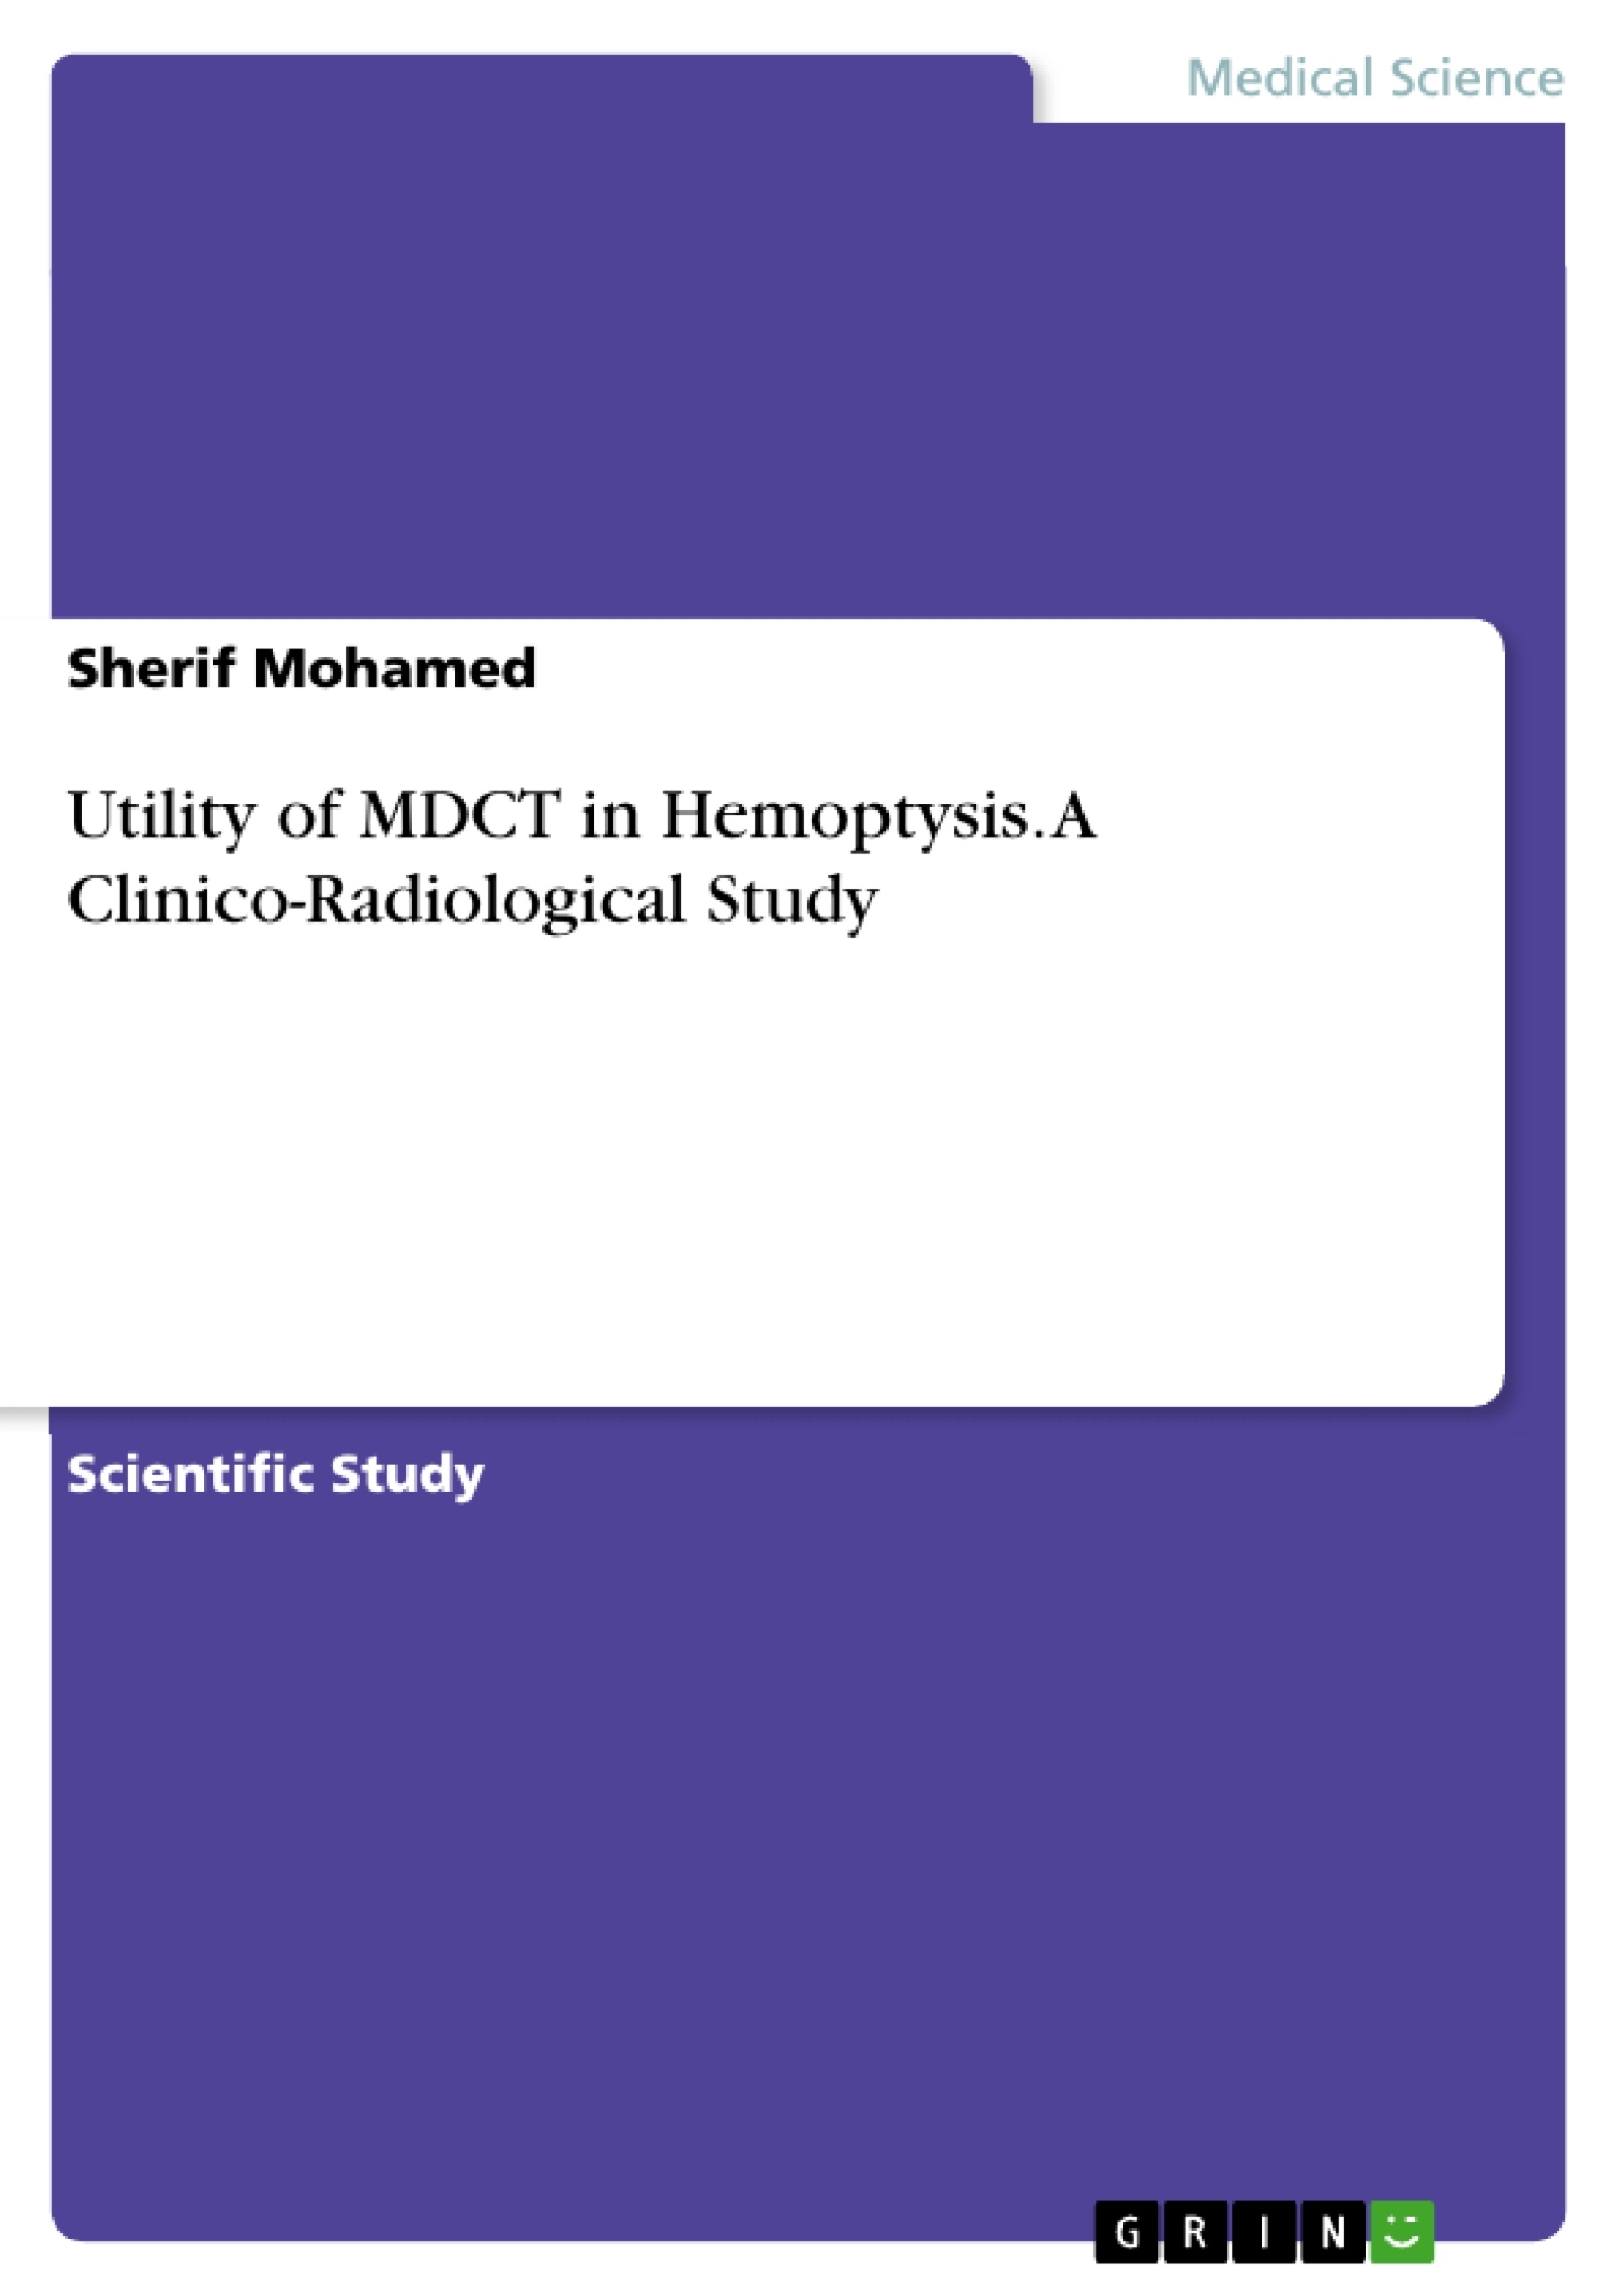 Title: Utility of MDCT in Hemoptysis. A Clinico-Radiological Study